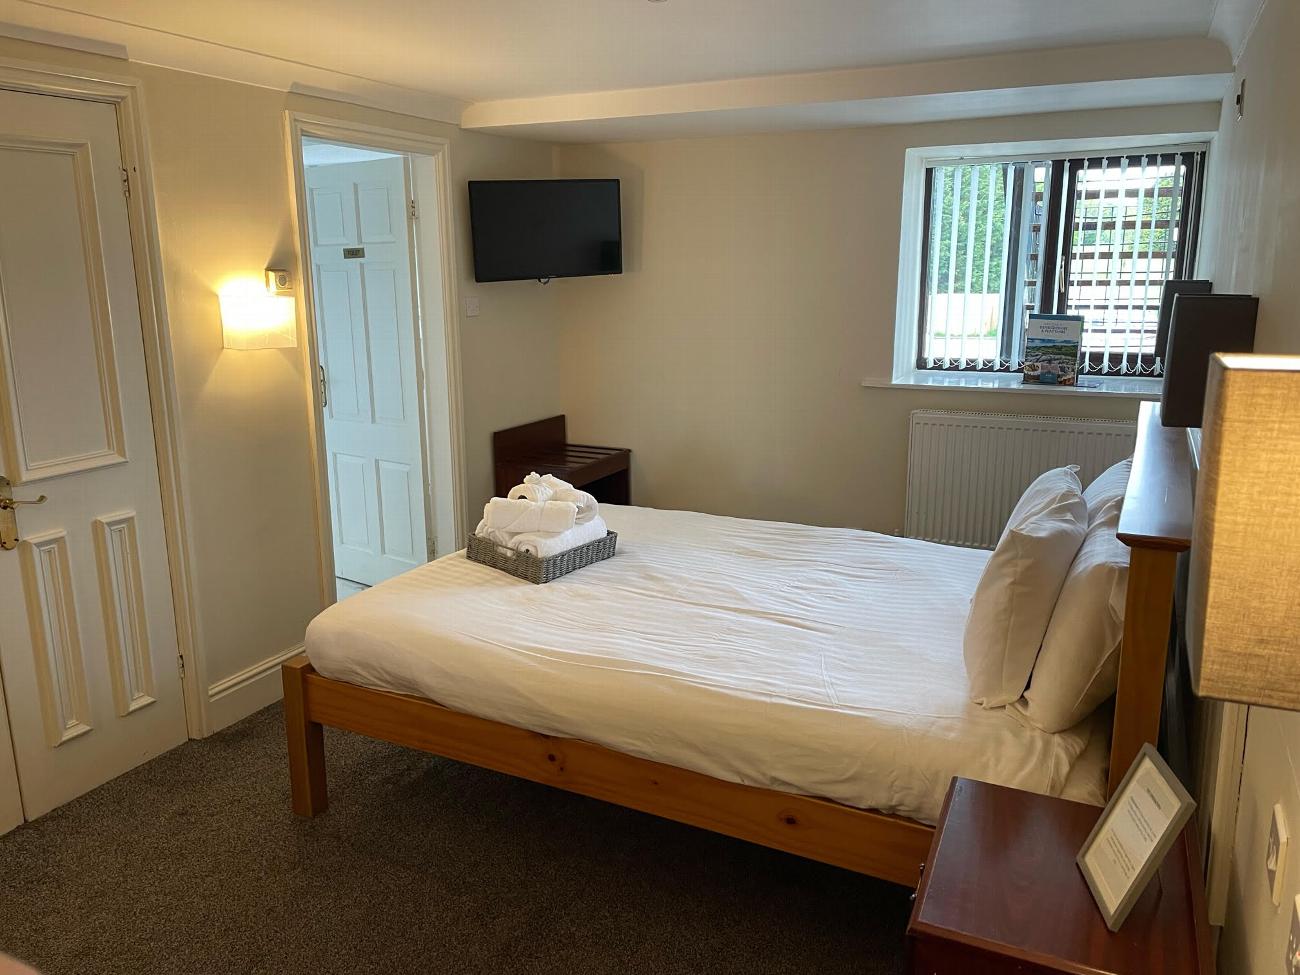 Hotel Rooms in North Wales and Cheshire | Flint Mountain Park Hotel gallery image 12